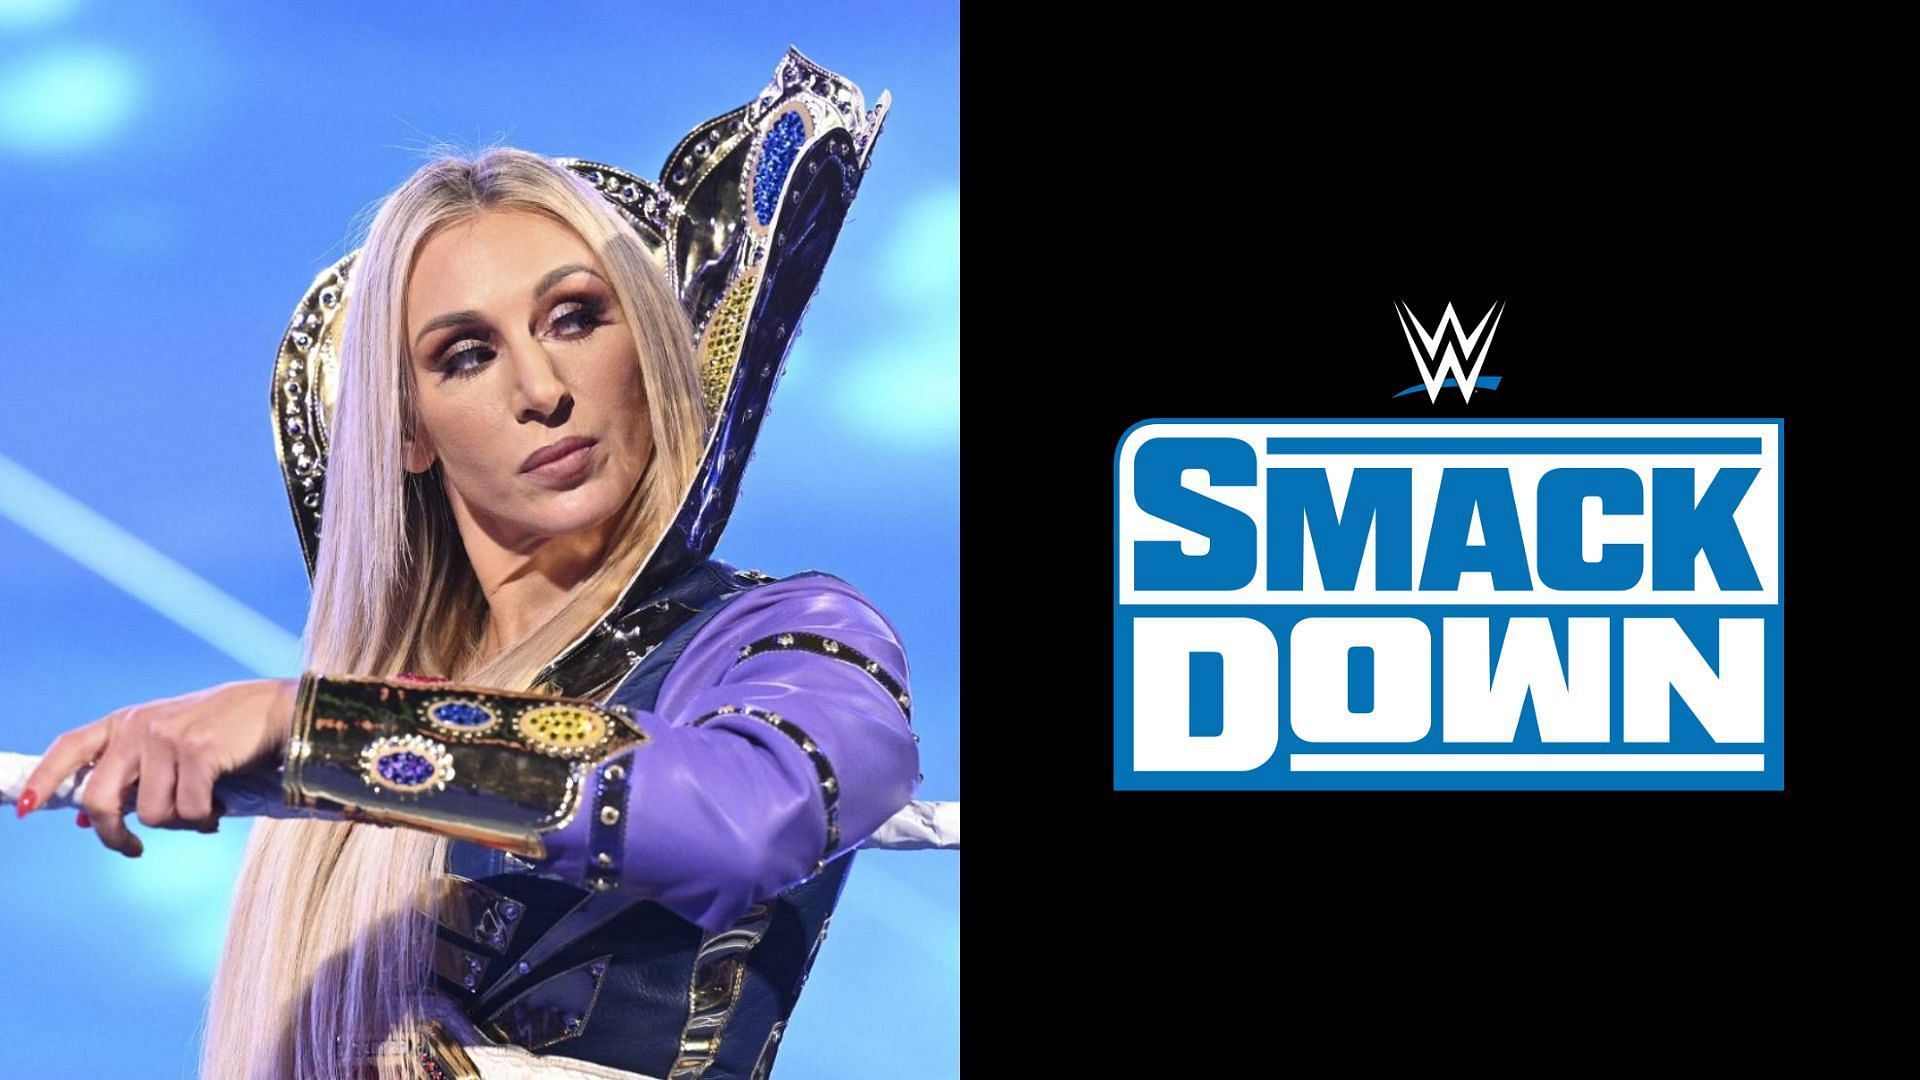 Charlotte Flair is a SmackDown Superstar